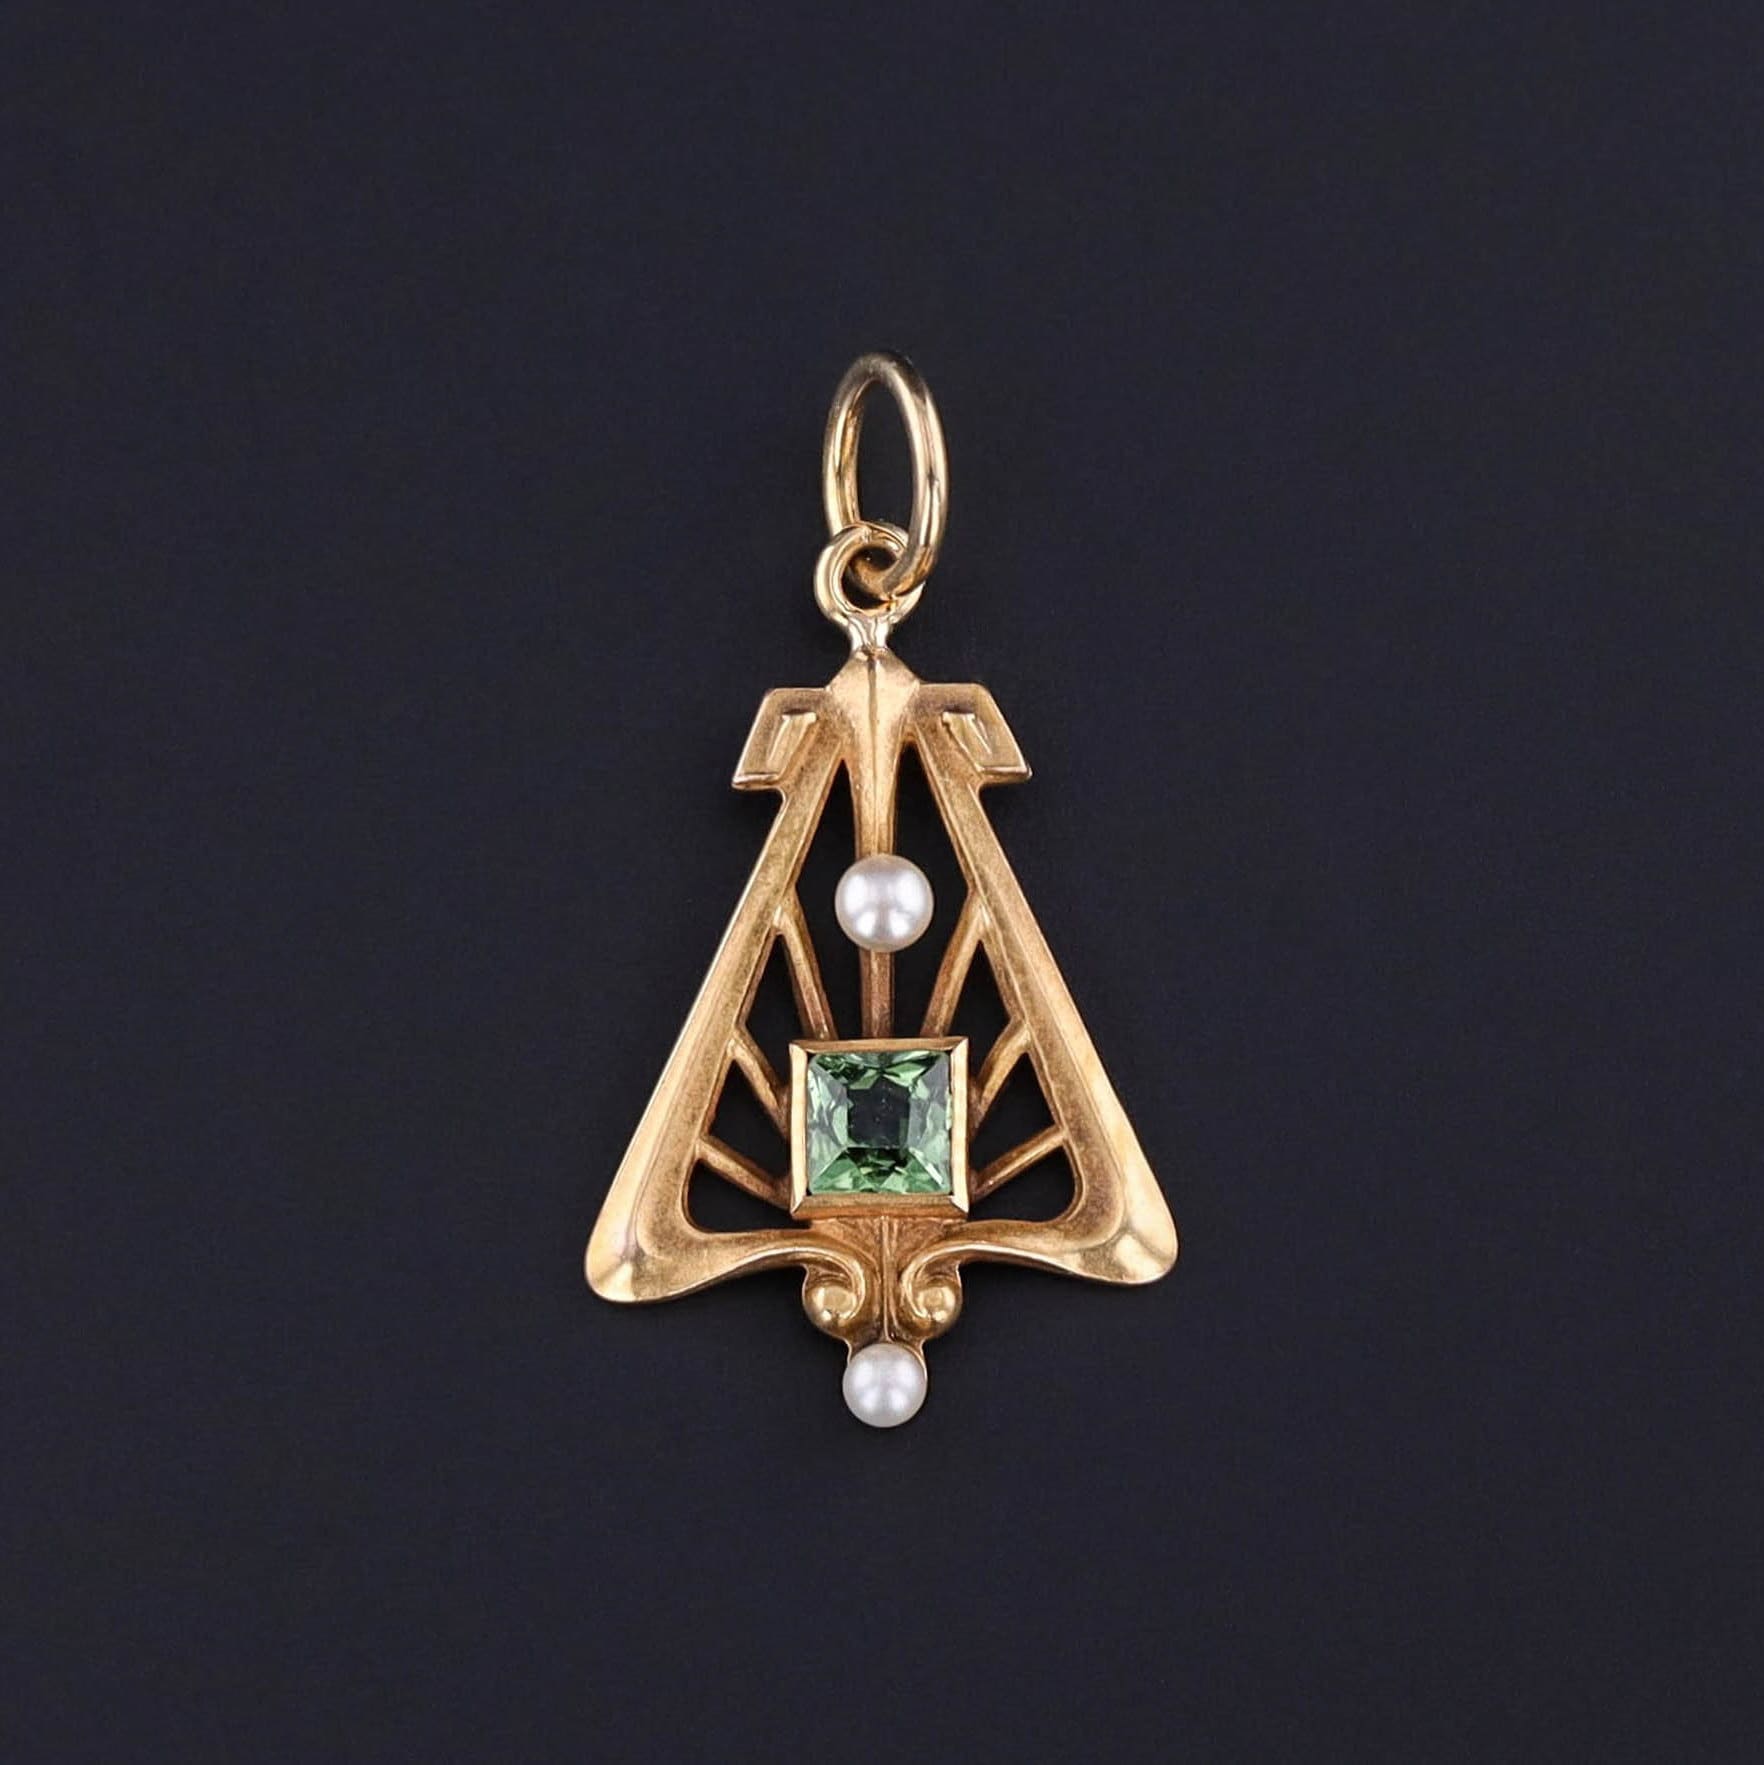 Antique Tourmaline and Pearl Conversion Charm of 14k Gold